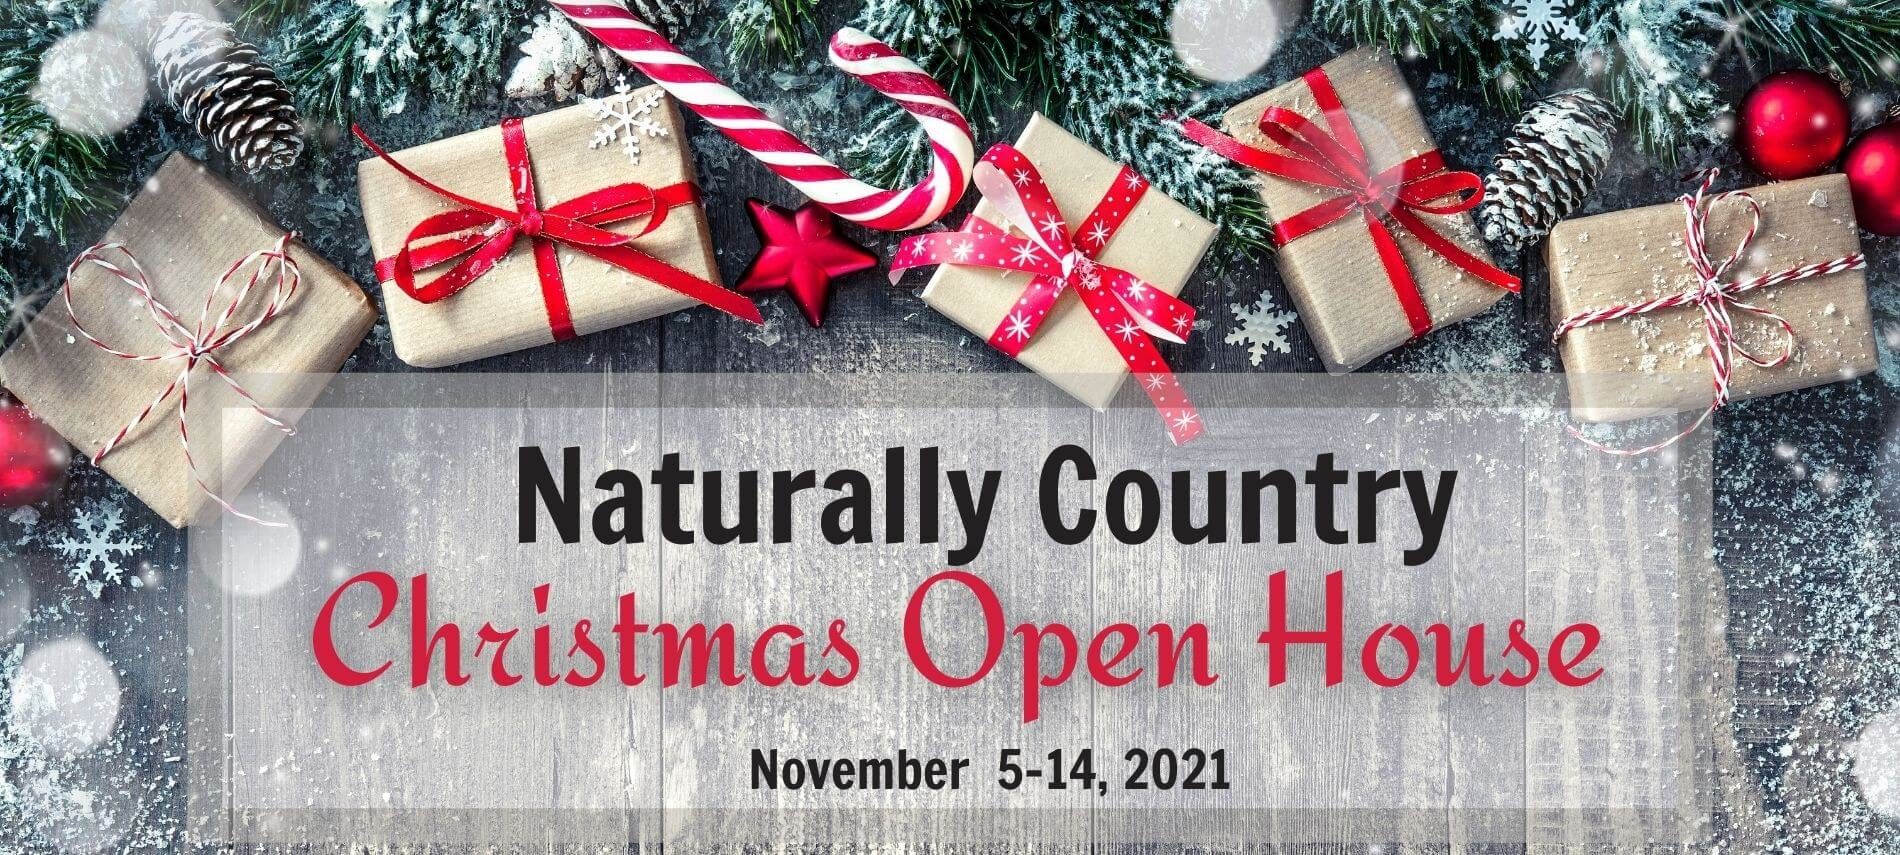 Naturally Country Chirstmas Open House